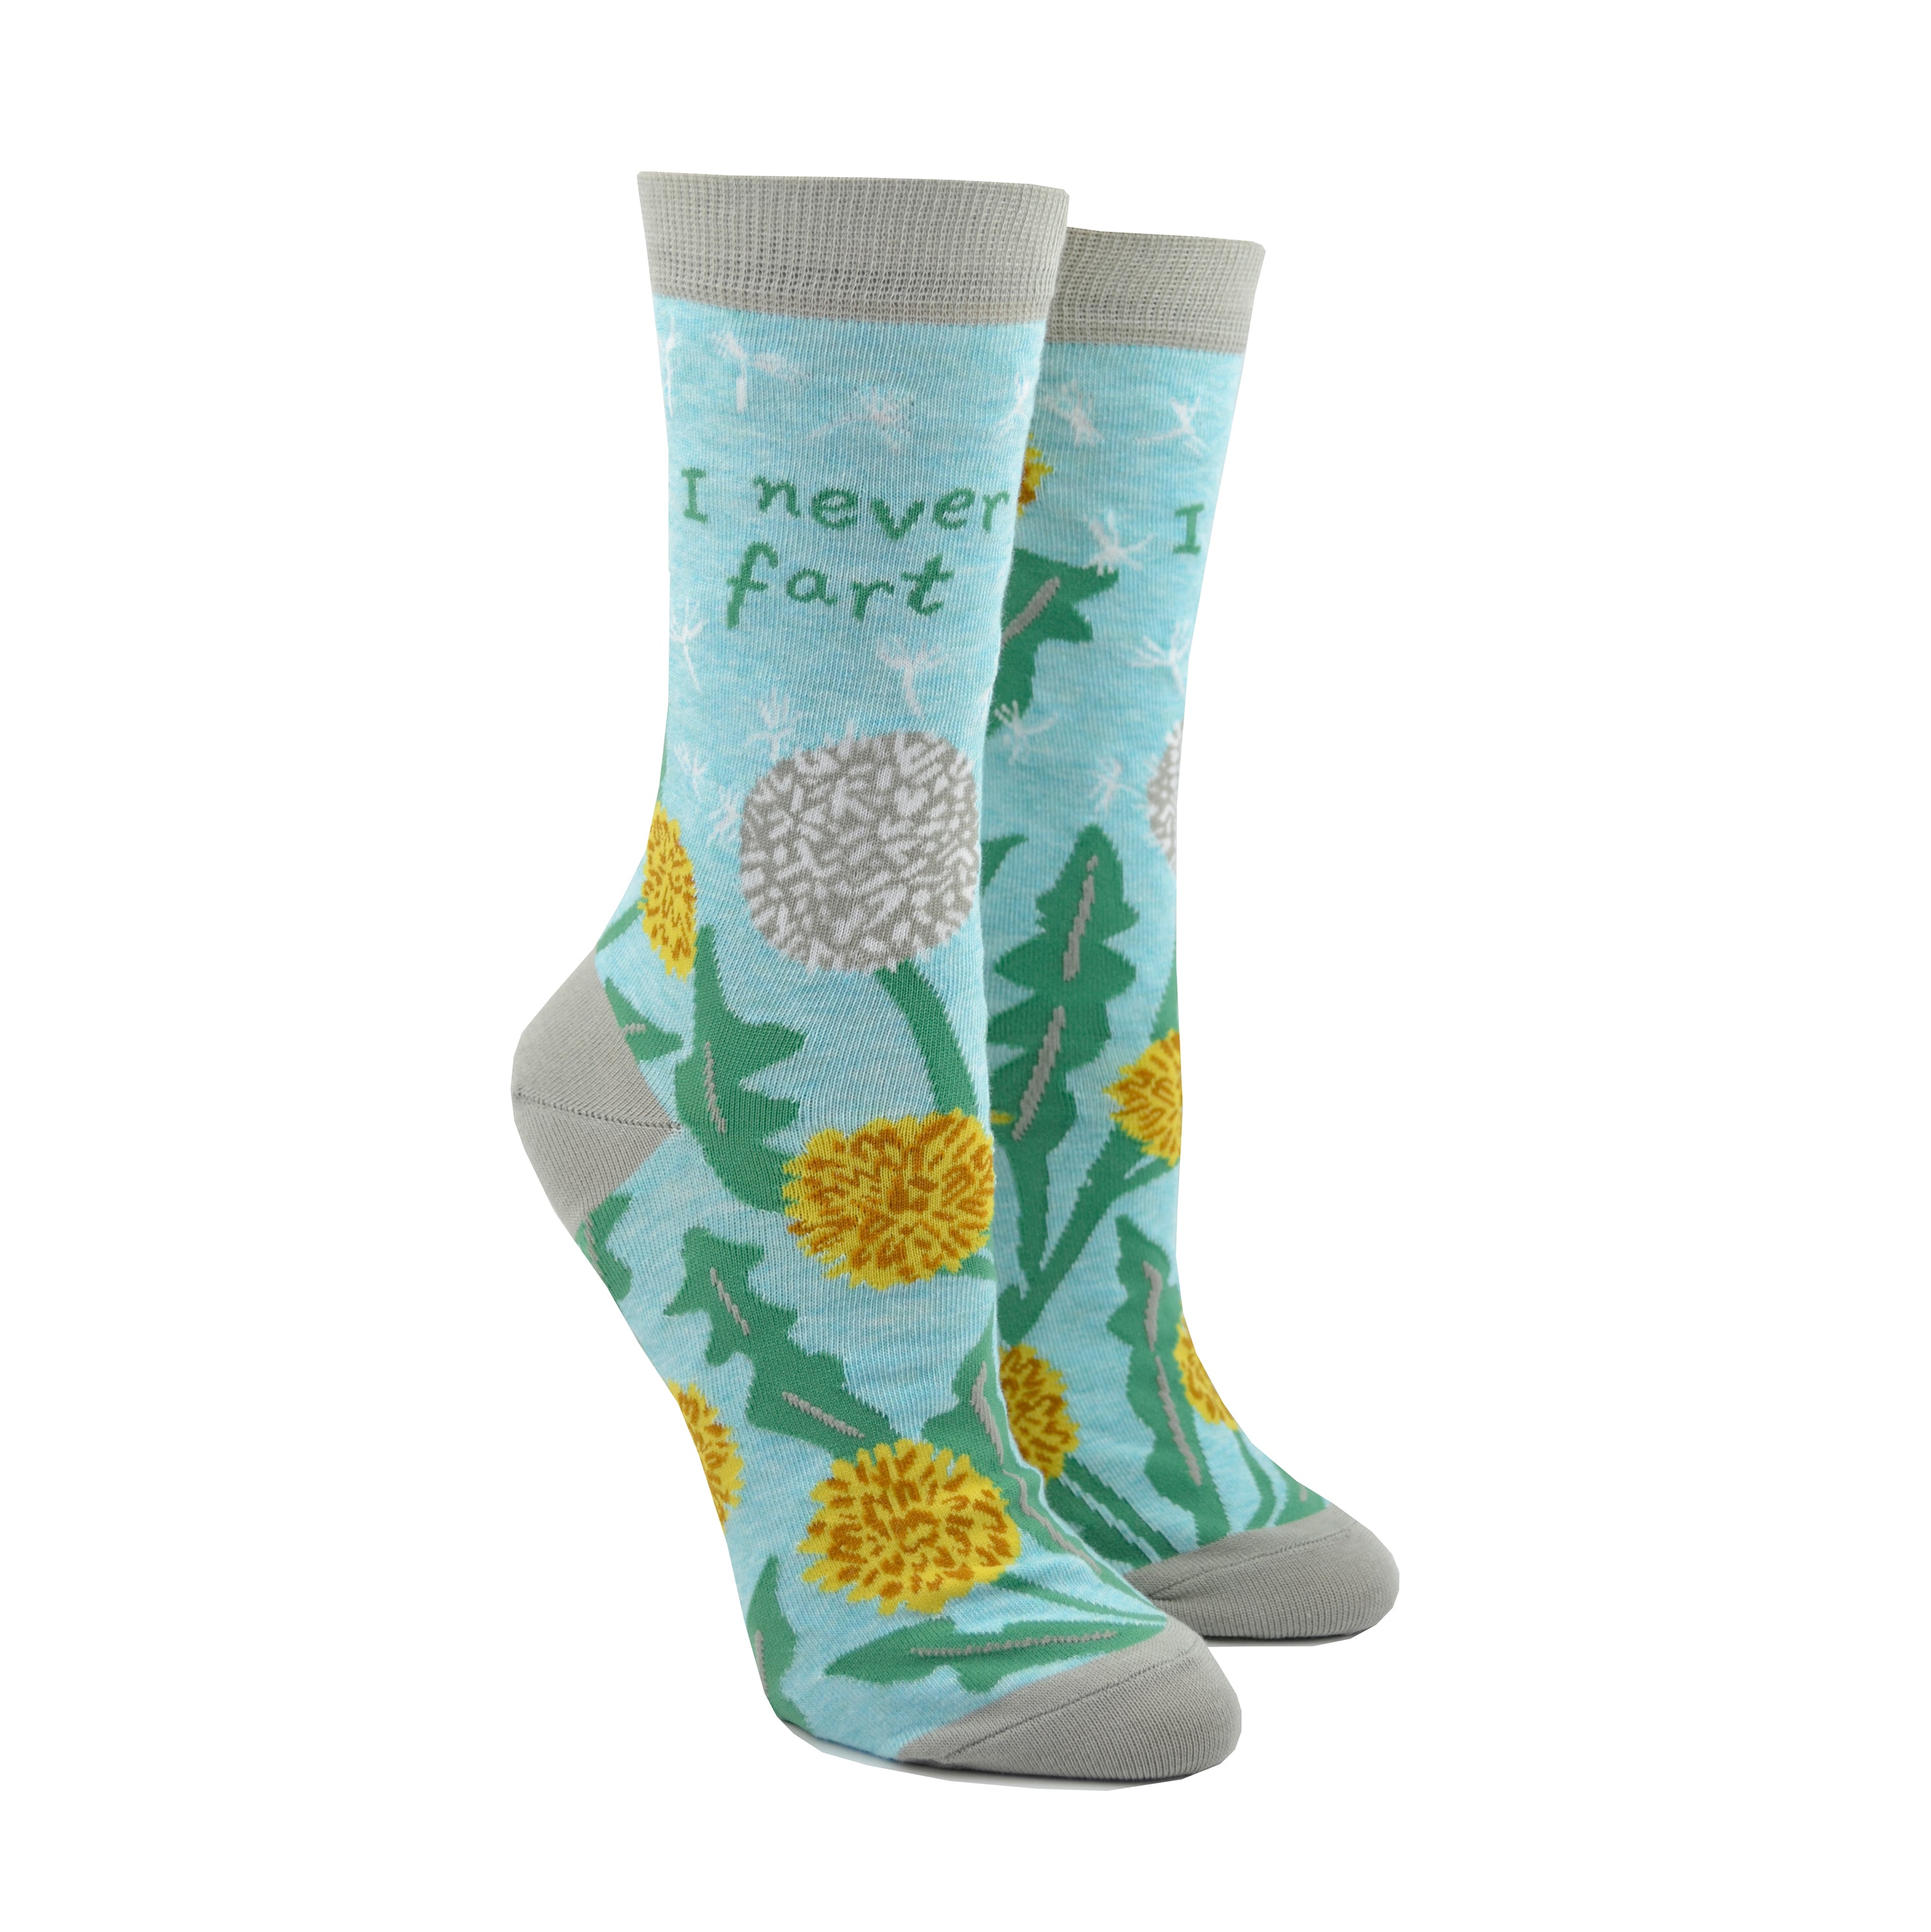 Shown on leg forms, a pair of light blue Blue Q socks with a grey heel, toe, and cuff. The feature a dandelion and puffball design on the foot and the phrase, 